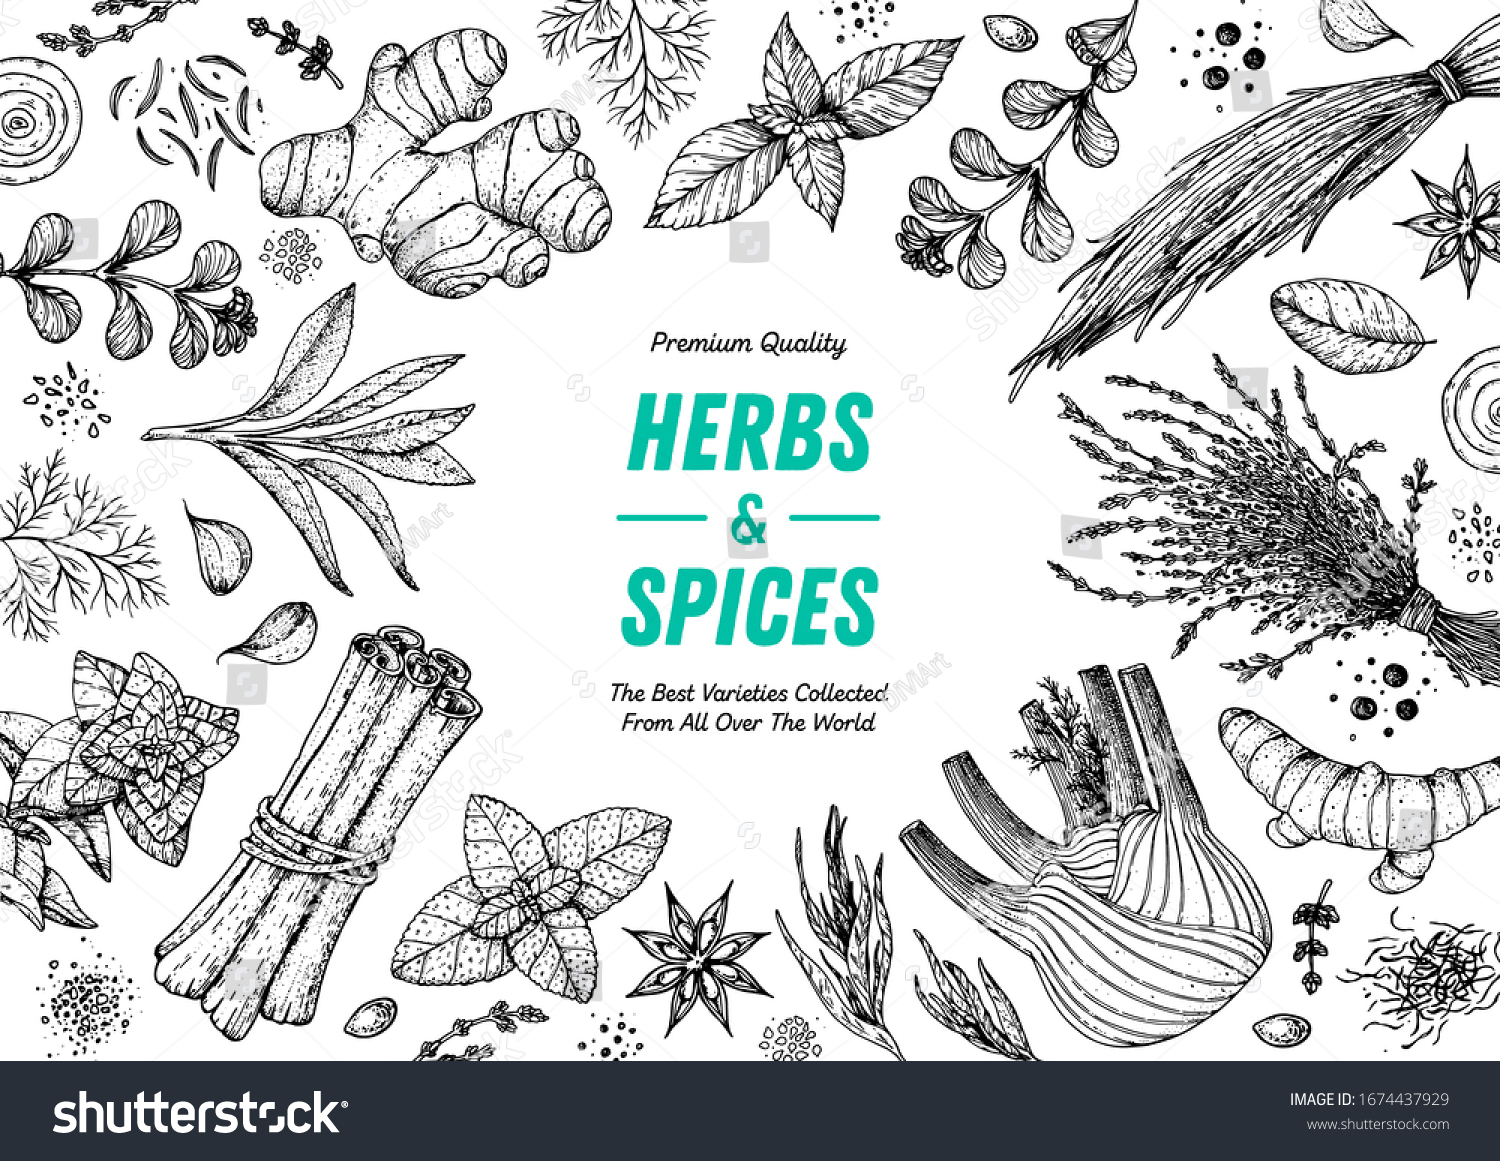 Herbs and spices hand drawn vector illustration. Aromatic plants. Hand drawn food sketch. Vintage illustration. Card design. Sketch style. Spice and herbs black and white design.